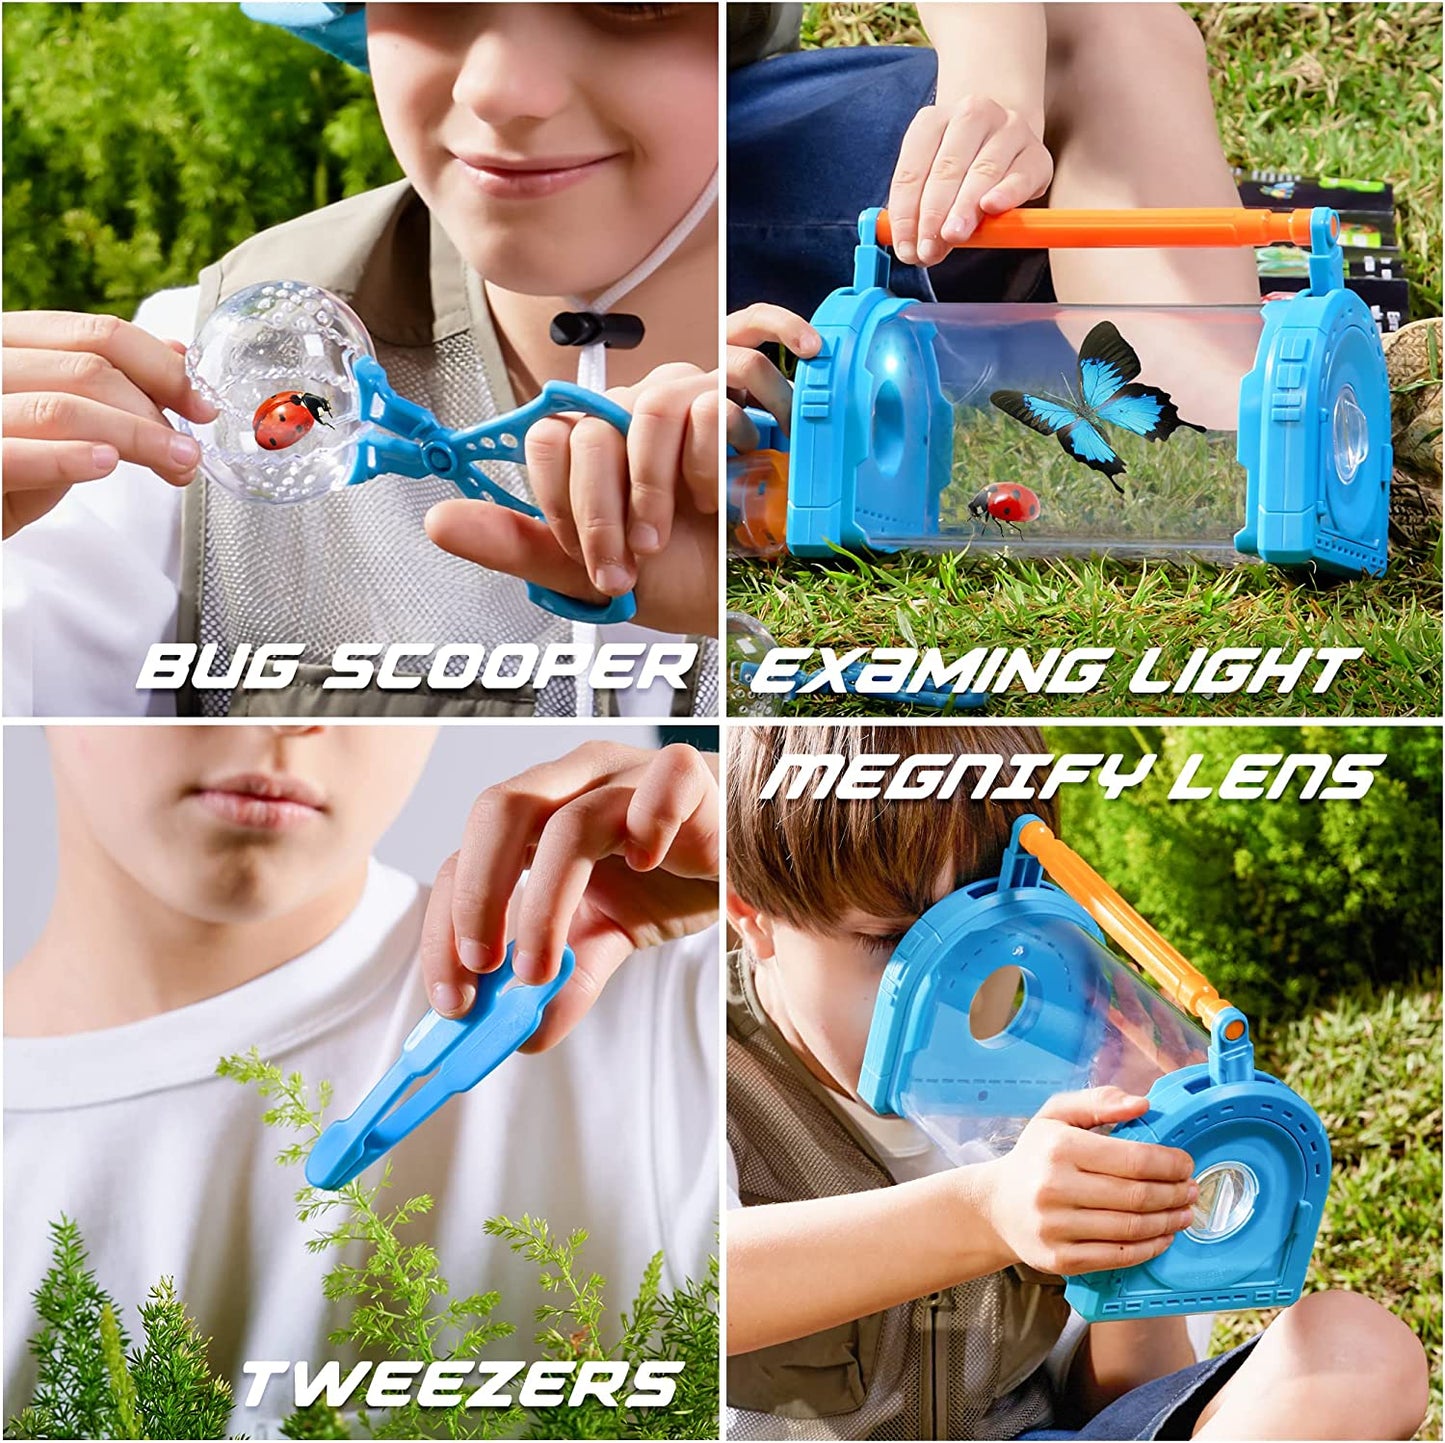 Play-Act Bug Catcher Kit for Kids - Light Up Critter Habitat Box for Indoor/Outdoor Insect Collecting - Includes Bug Tong, Tweezer, Activity Booklet, and Pipette 